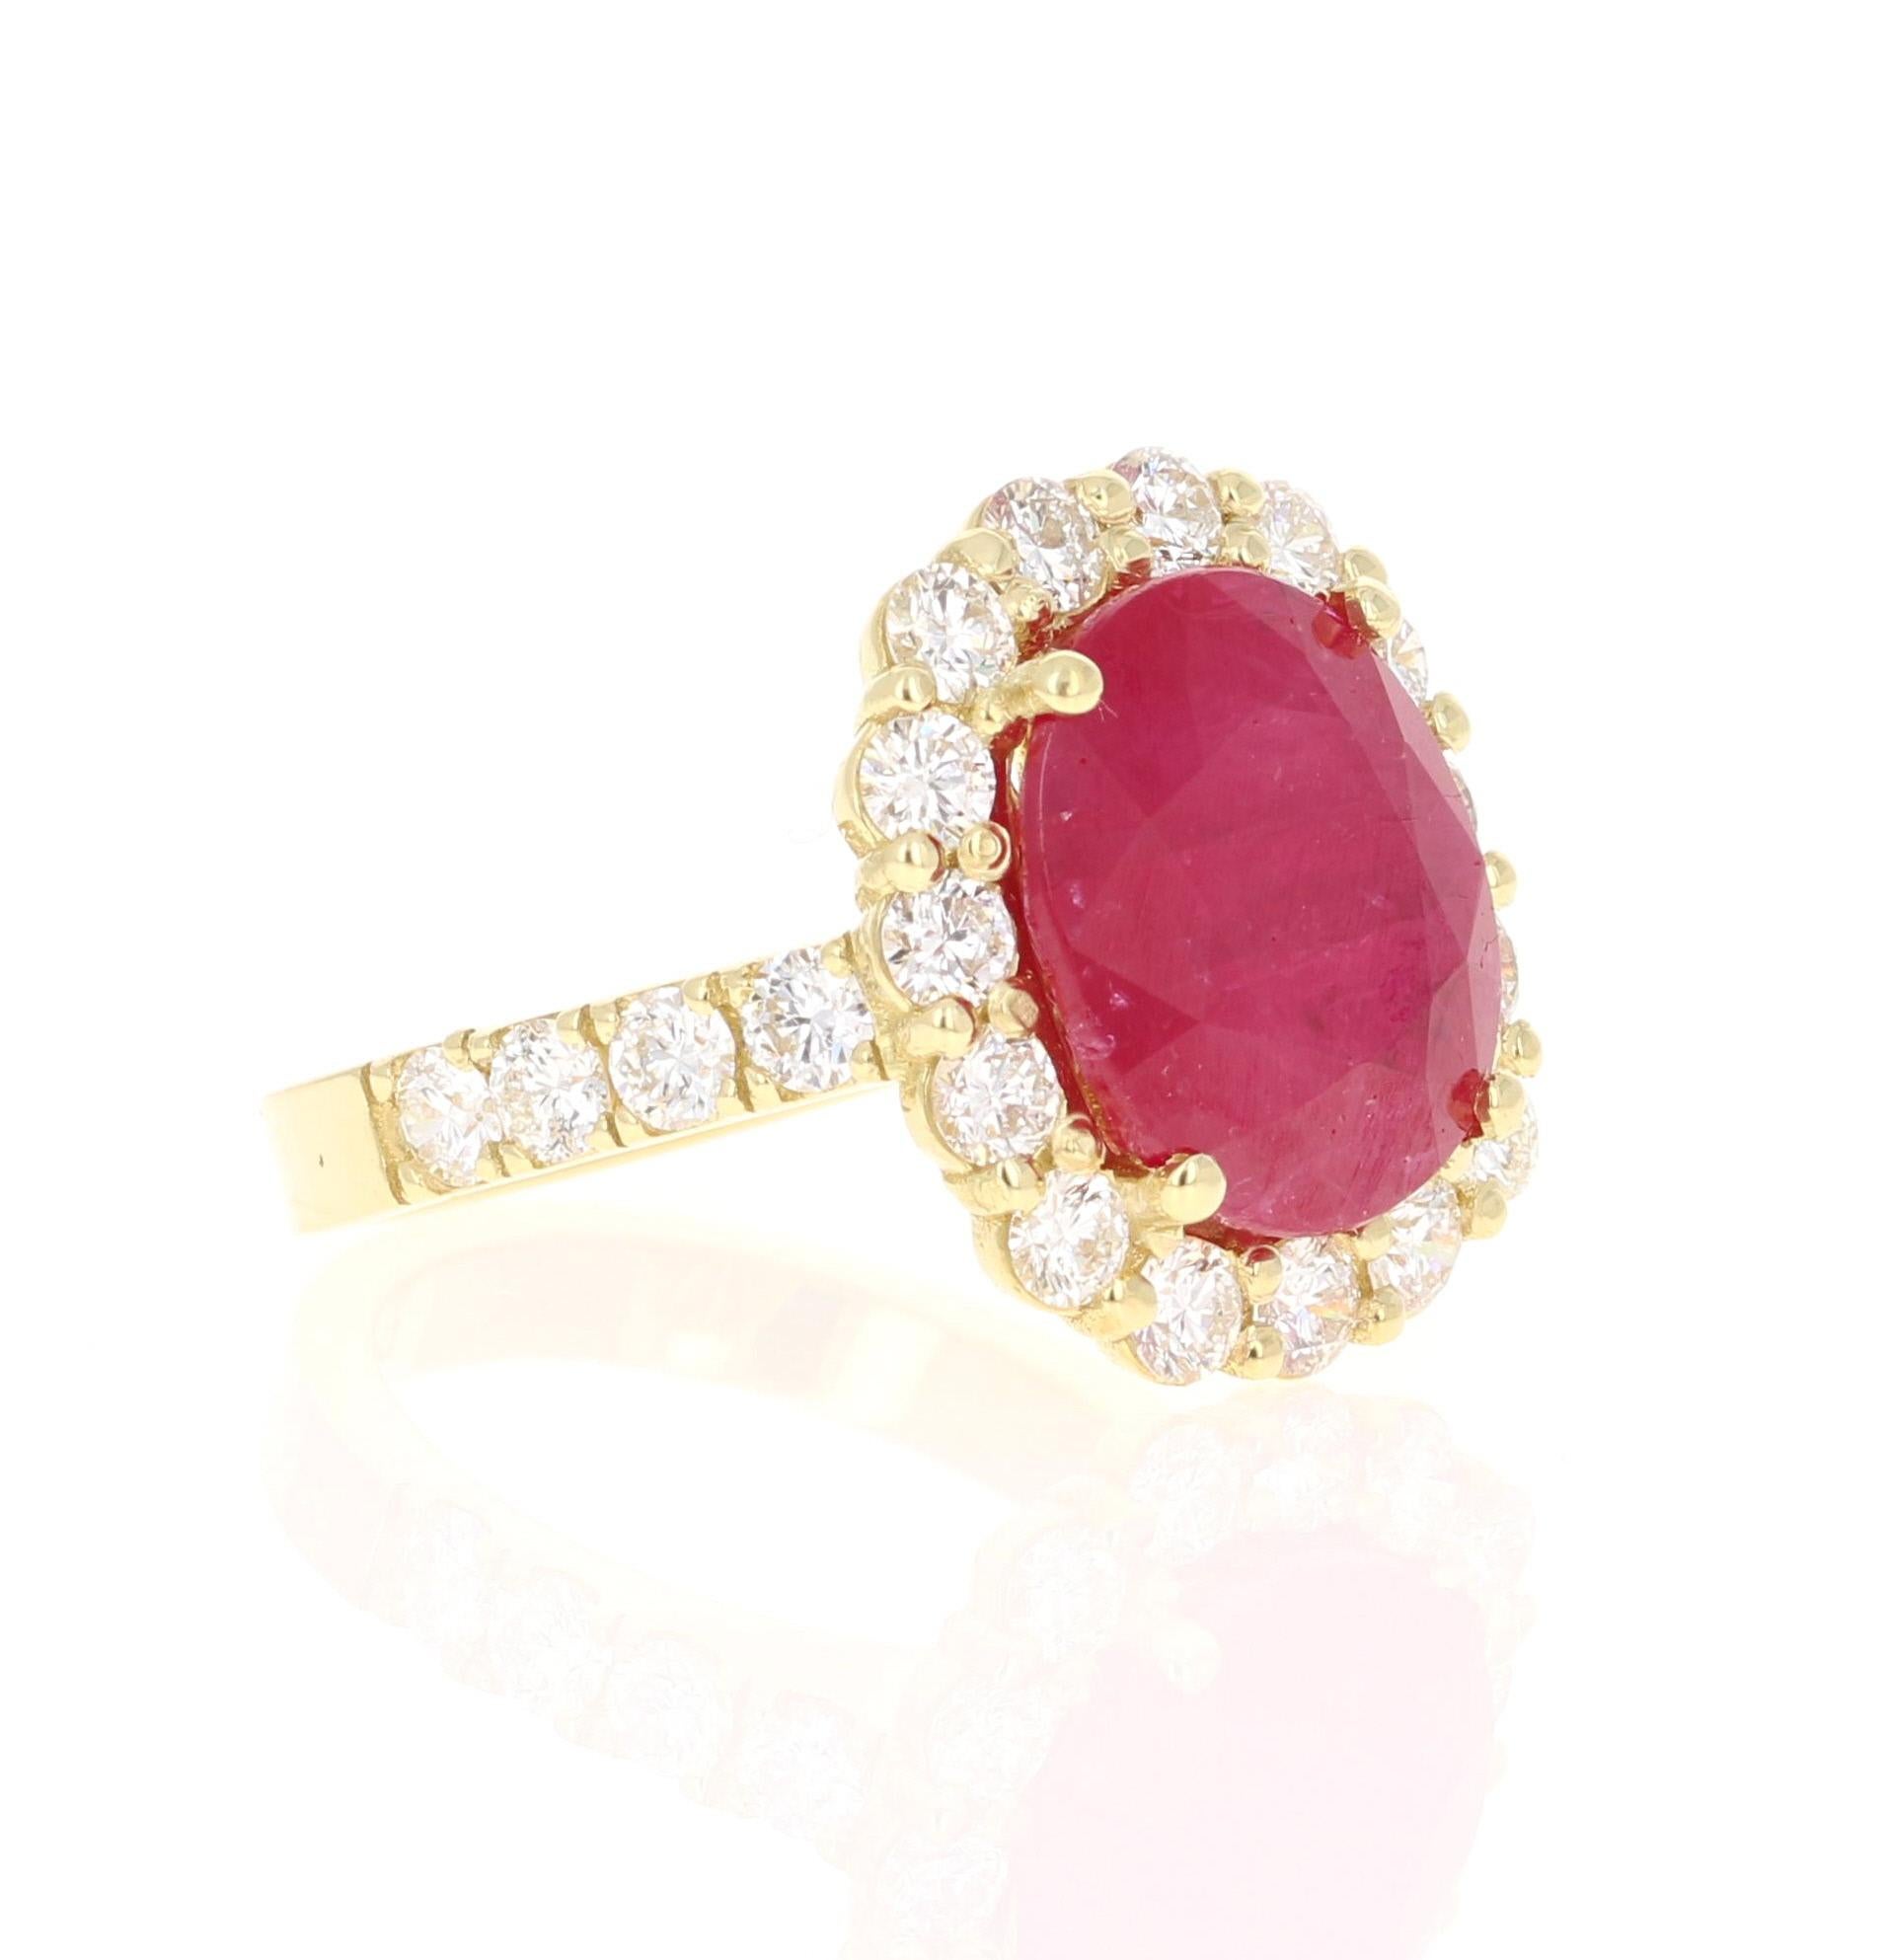 This gorgeous and elegant Ruby & Diamond Ring can be a gorgeous Engagement Ring or a Cocktail Ring. It has a Oval Cut Deep Red Ruby that is 7.47 Carats with a halo of 23 Round Cut Diamonds weighing 1.86 Carats. The total carat weight of the ring is